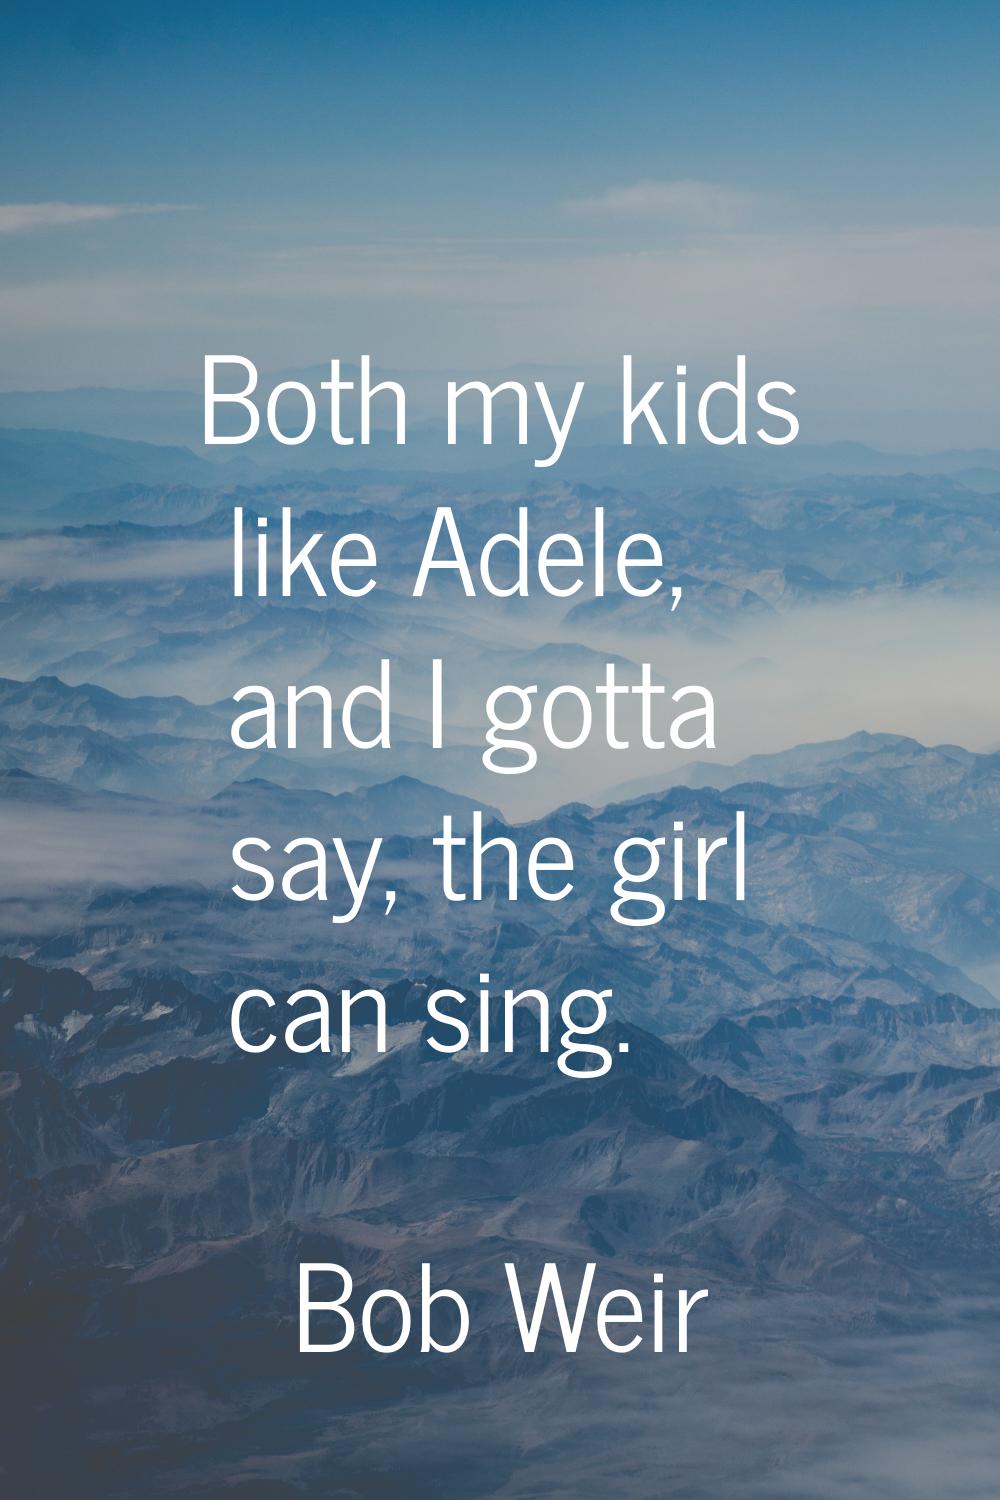 Both my kids like Adele, and I gotta say, the girl can sing.